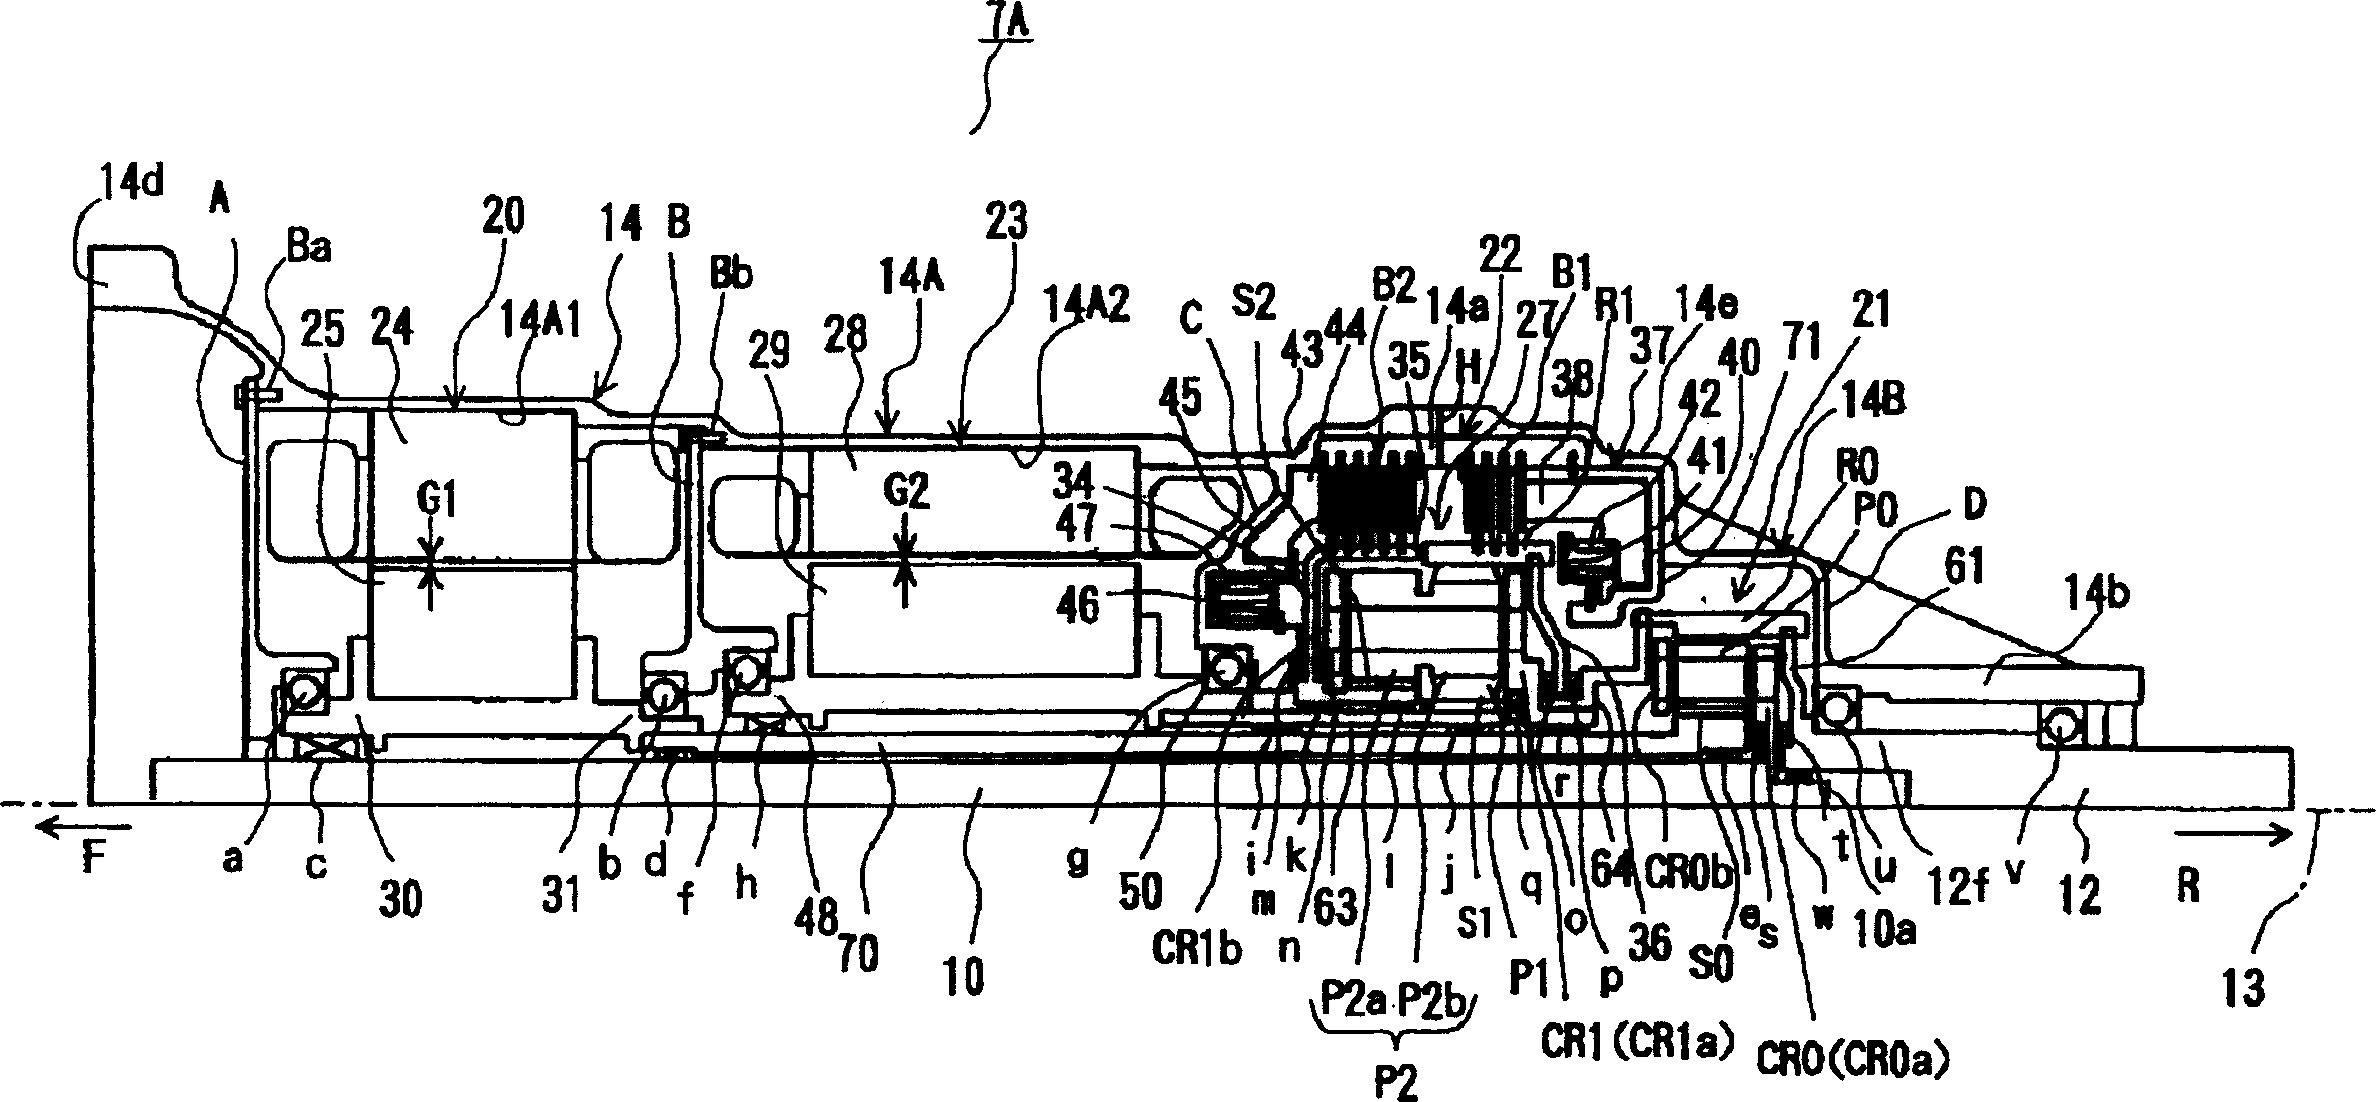 Hybrid drive device and automobile with device mounted thereon